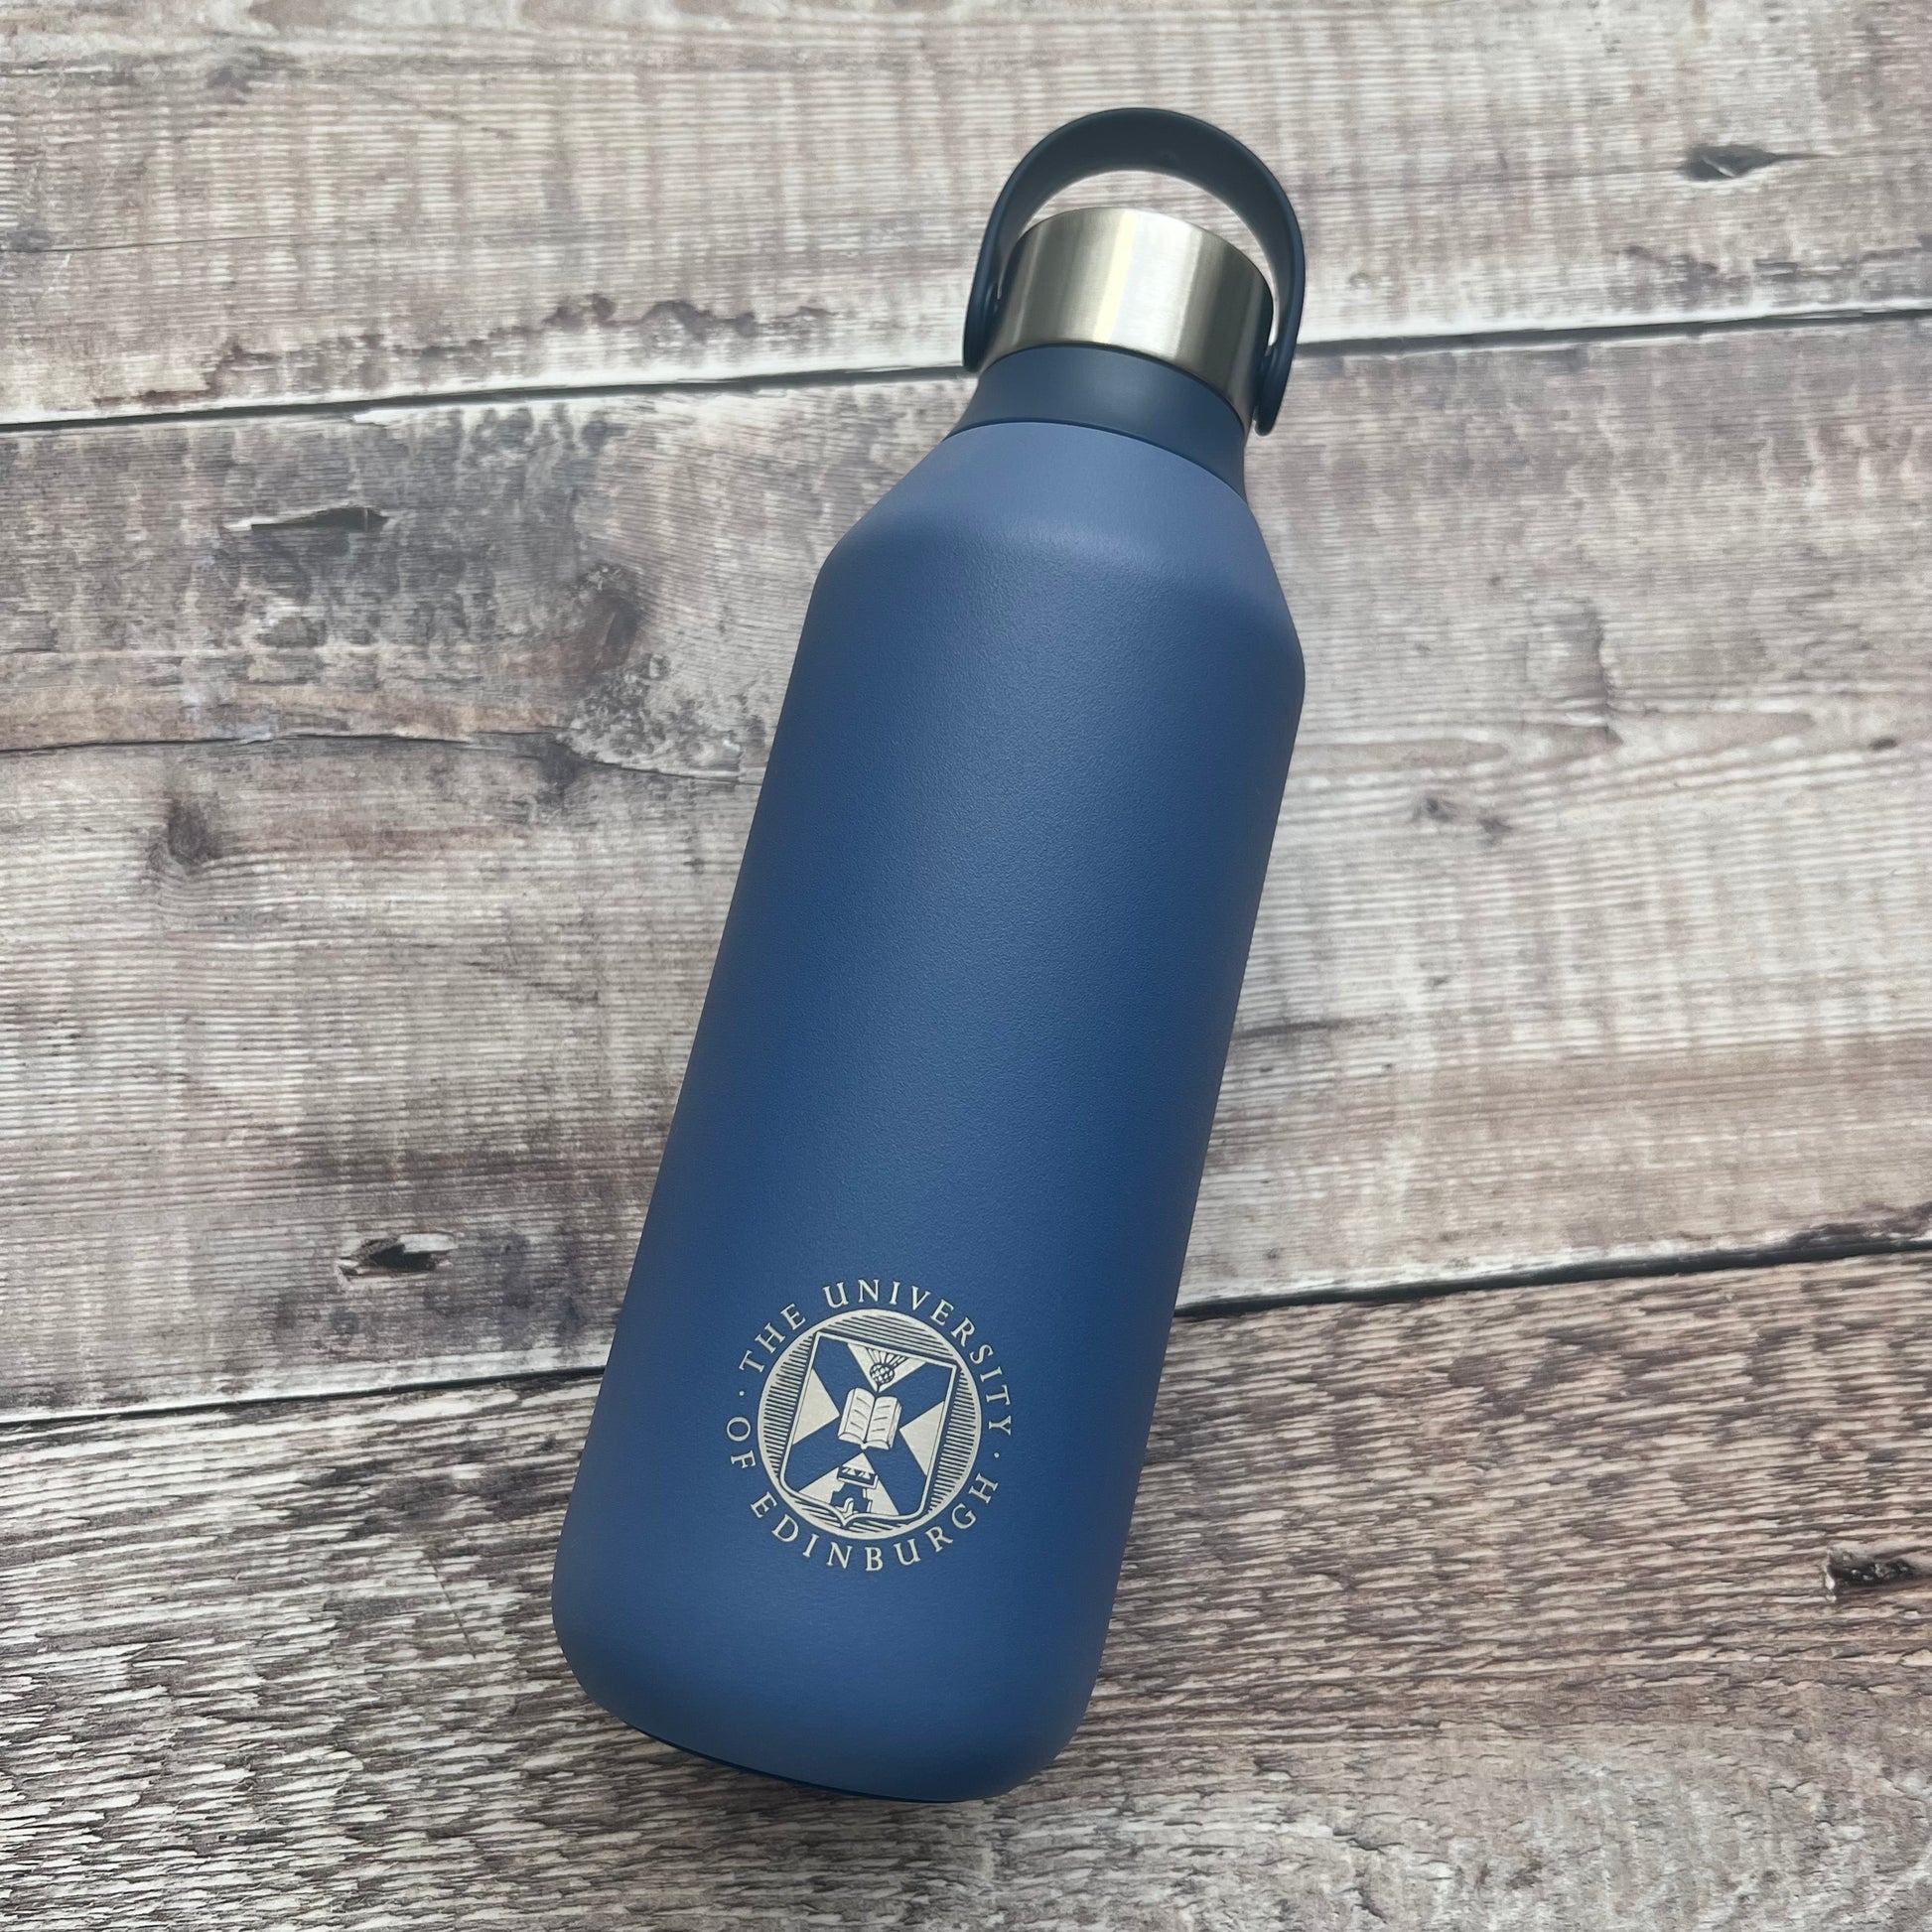 Blue chillys bottle with the university crest engraved